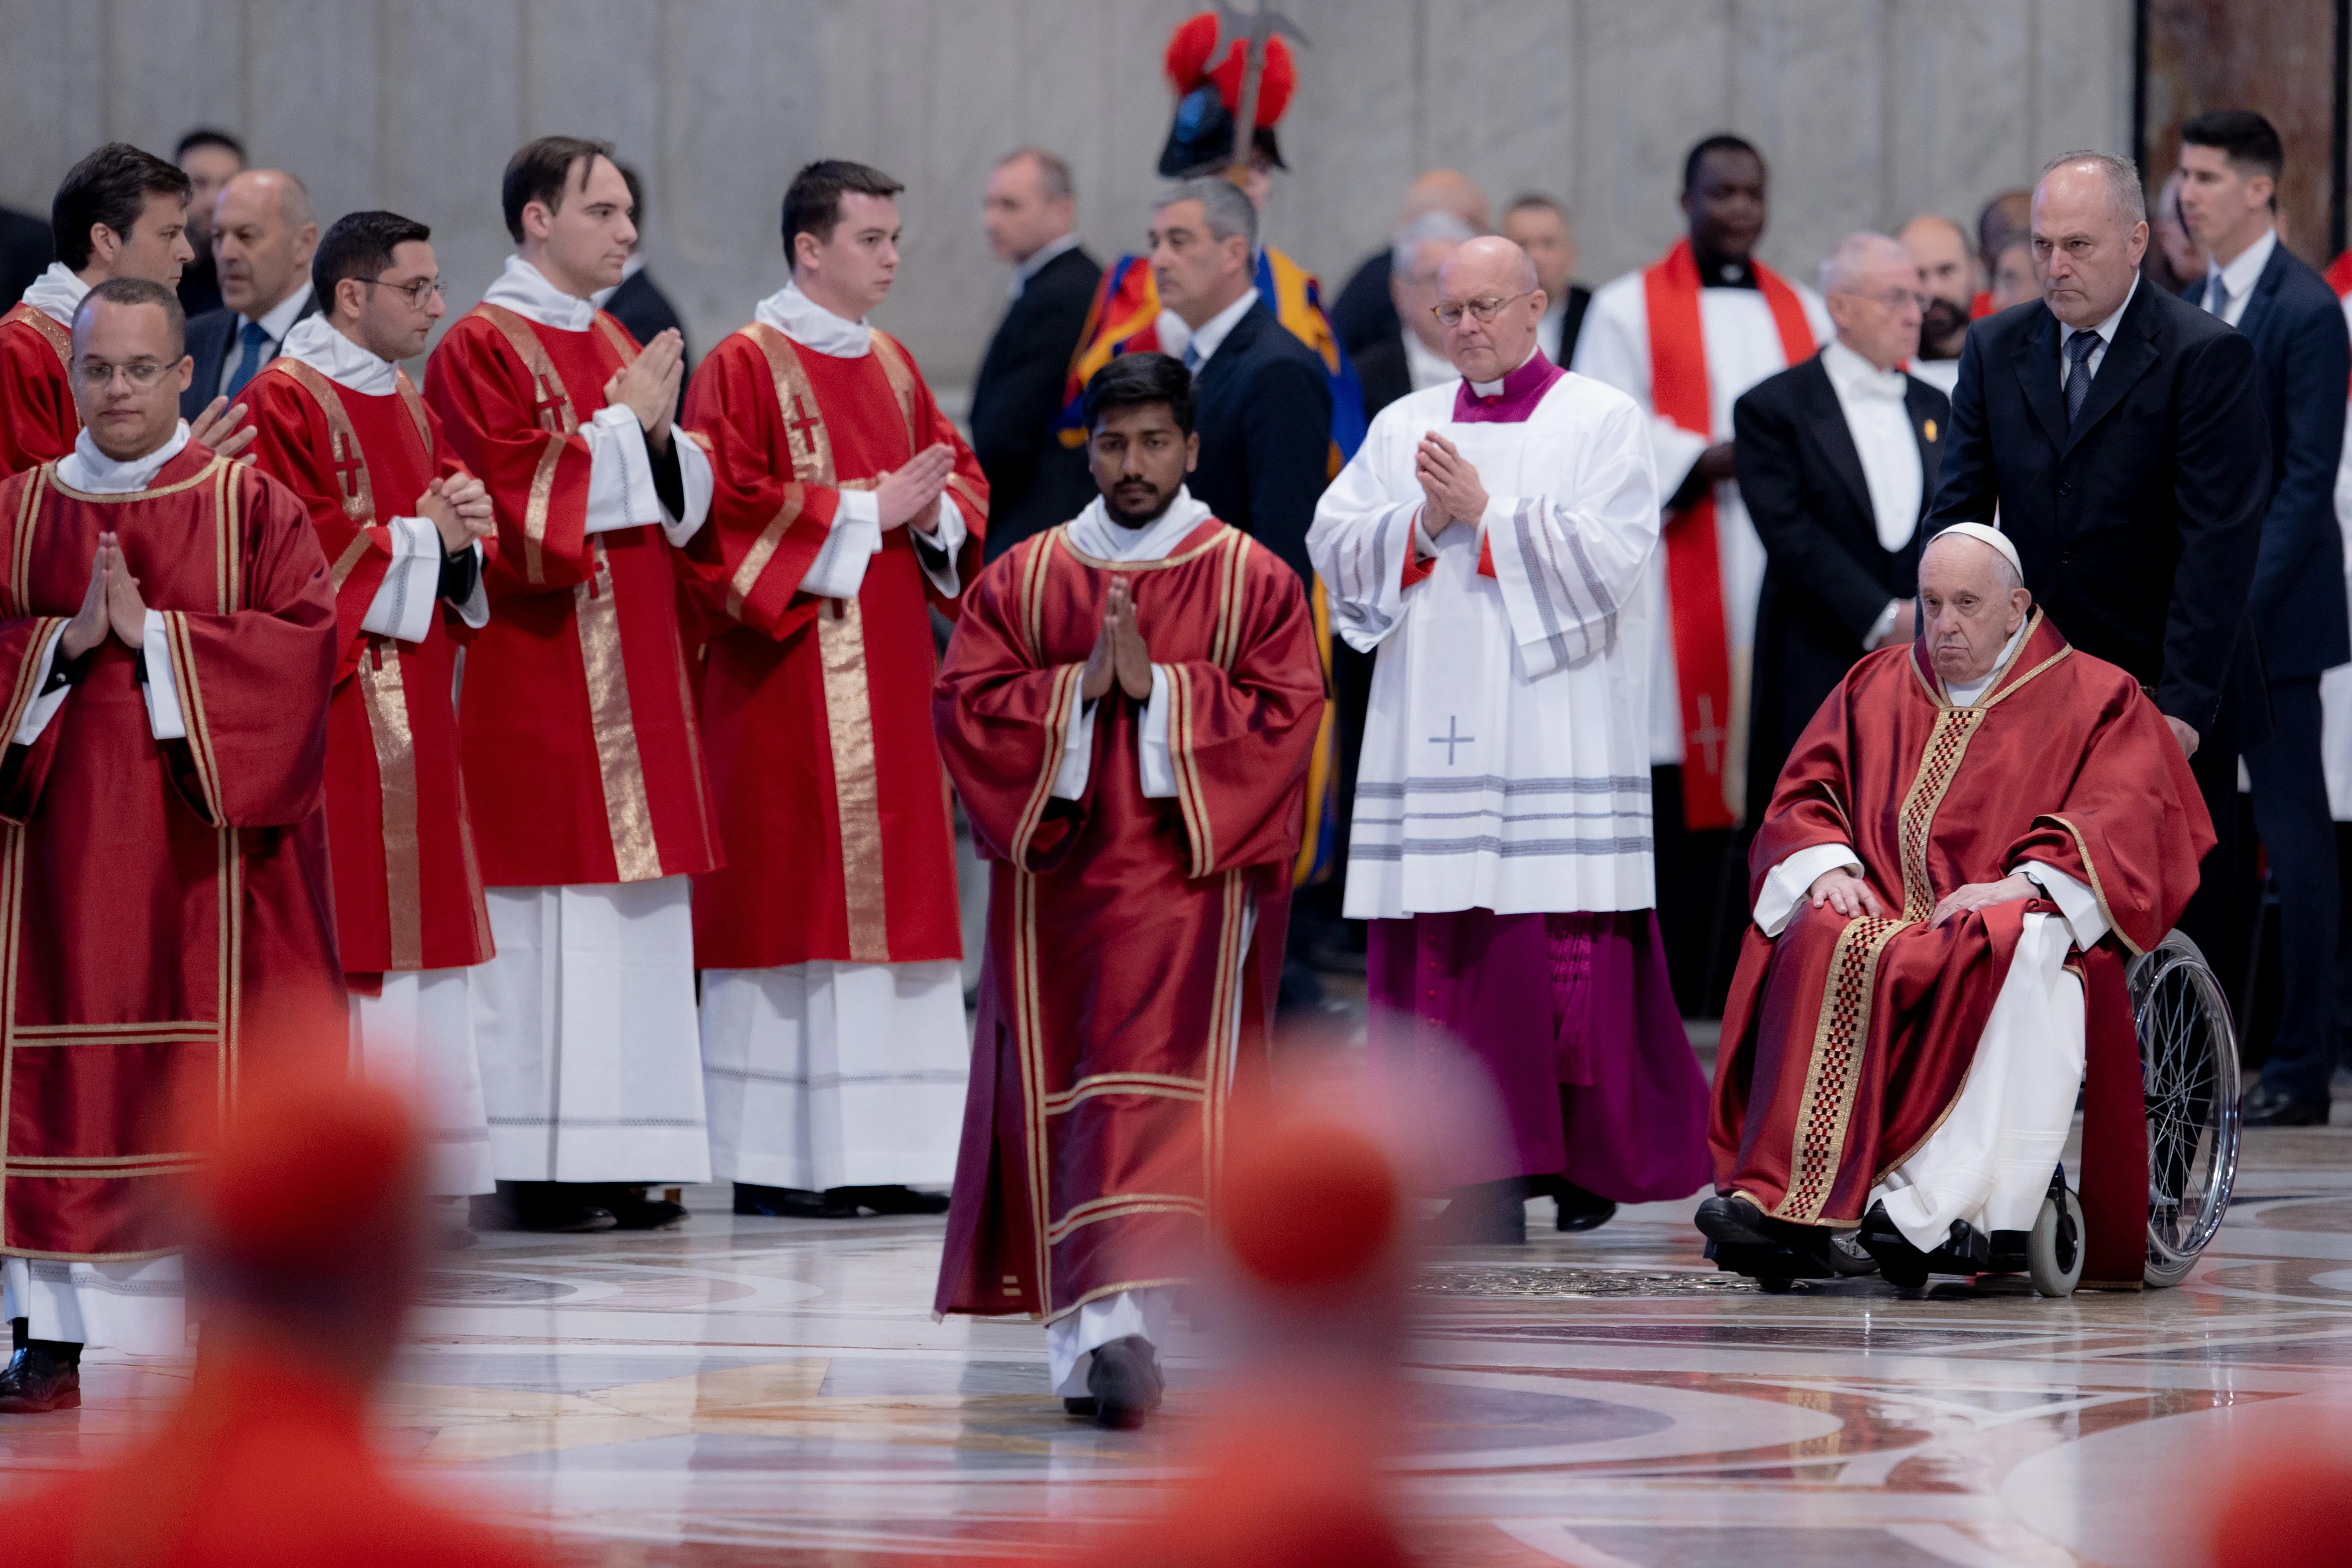 Pope Francis arrives at the Liturgy of the Lord’s Passion in St. Peter's Basilica on Good Friday on April 7, 2023. Credit: Daniel Ibanez/CNA